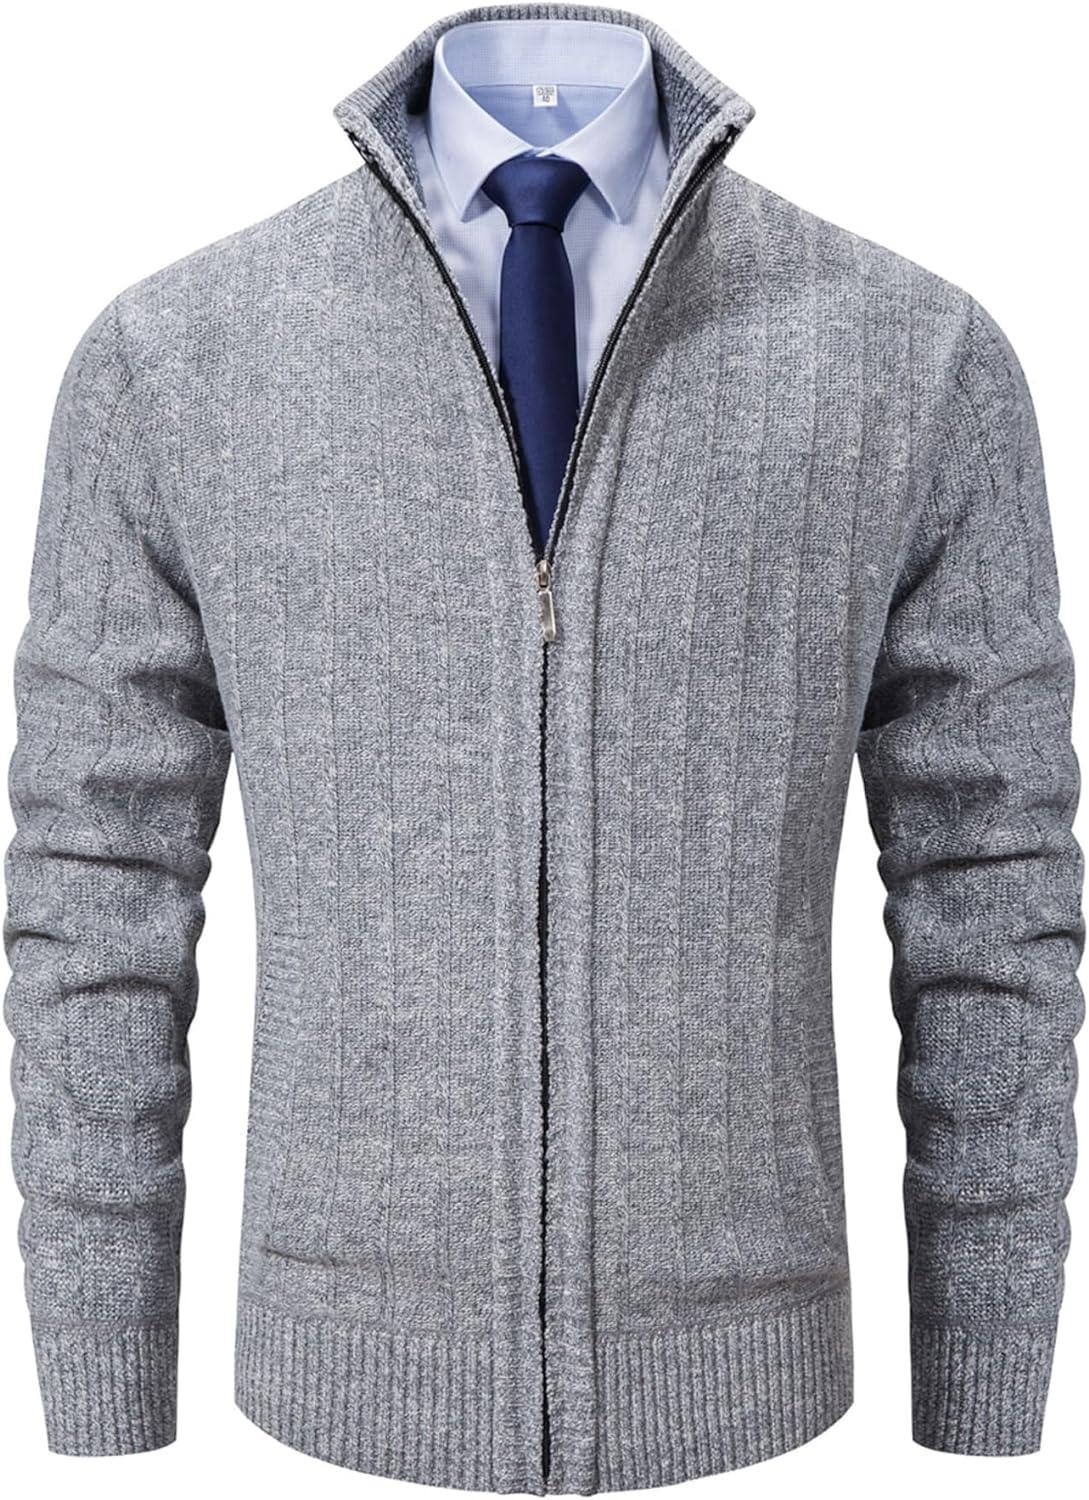 Men's Sweaters Full Zip Slim Thick Knitted Cardigan Sweaters Jacket with Pockets - L & M Kee, LLC